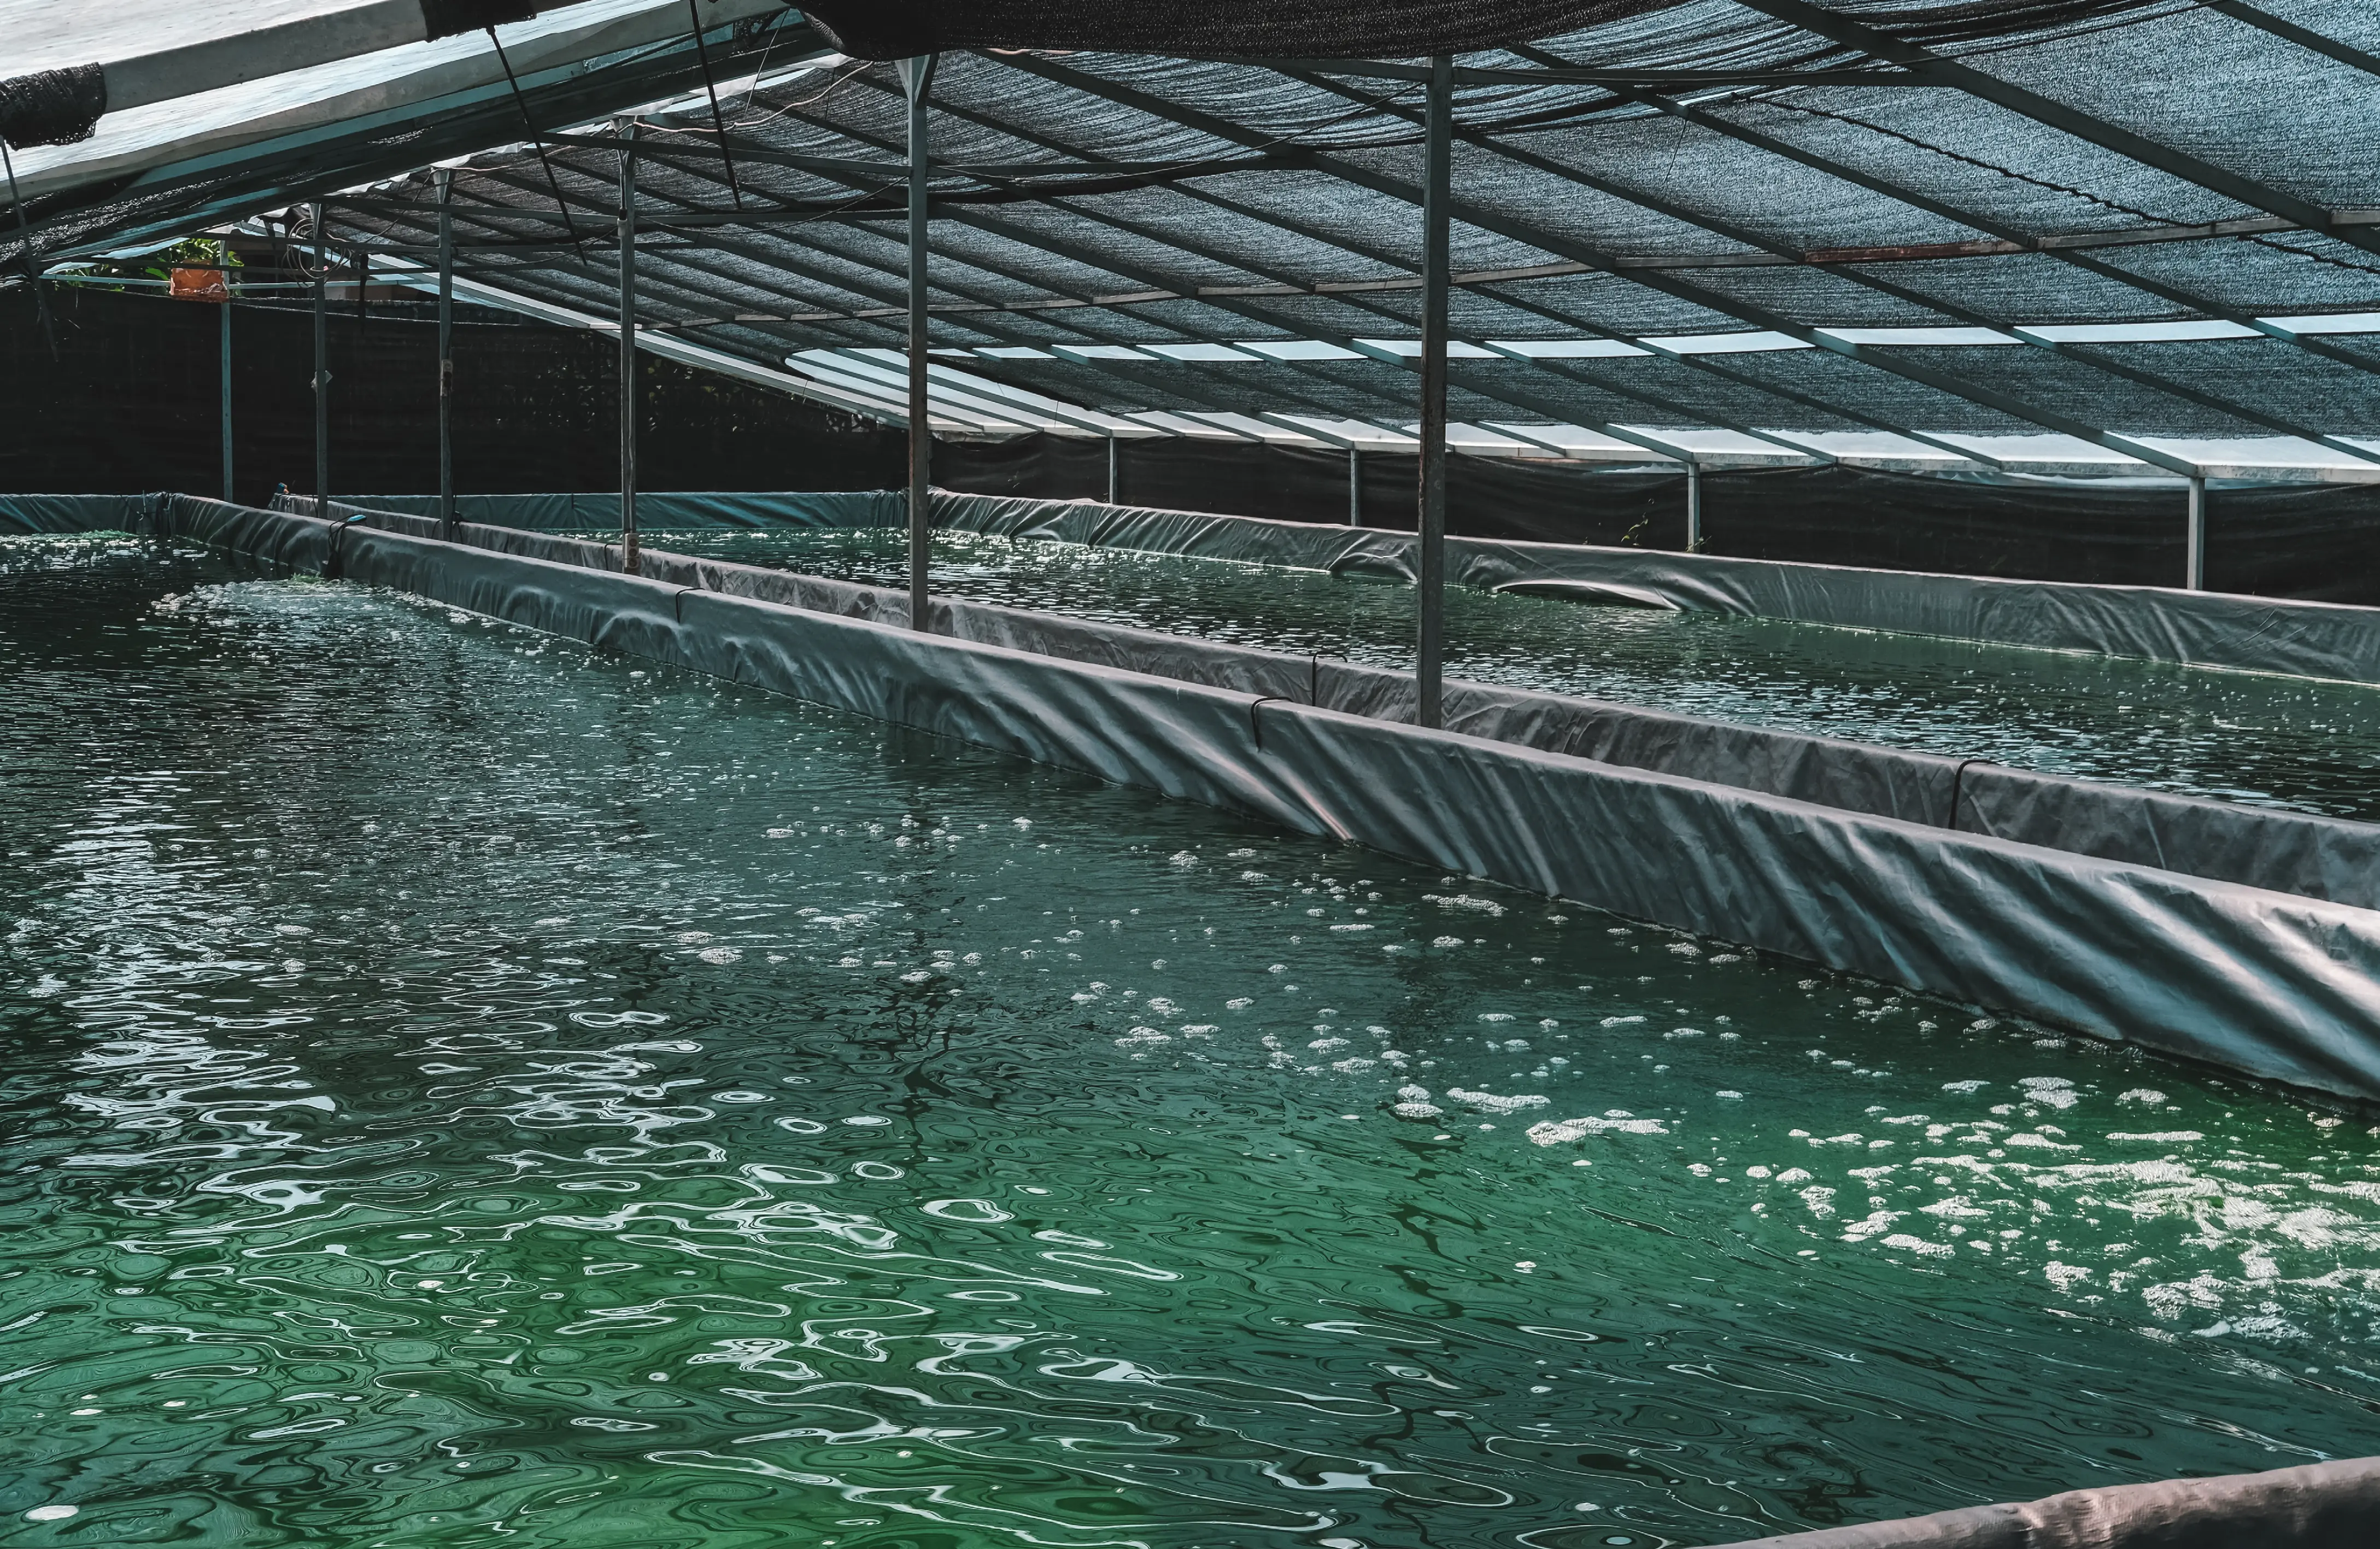 Open farming systems like ponds are easy to settle with limited investments costs and low maintenance, but they can be used to cultivate only the most robust microalgae like Spirulina.